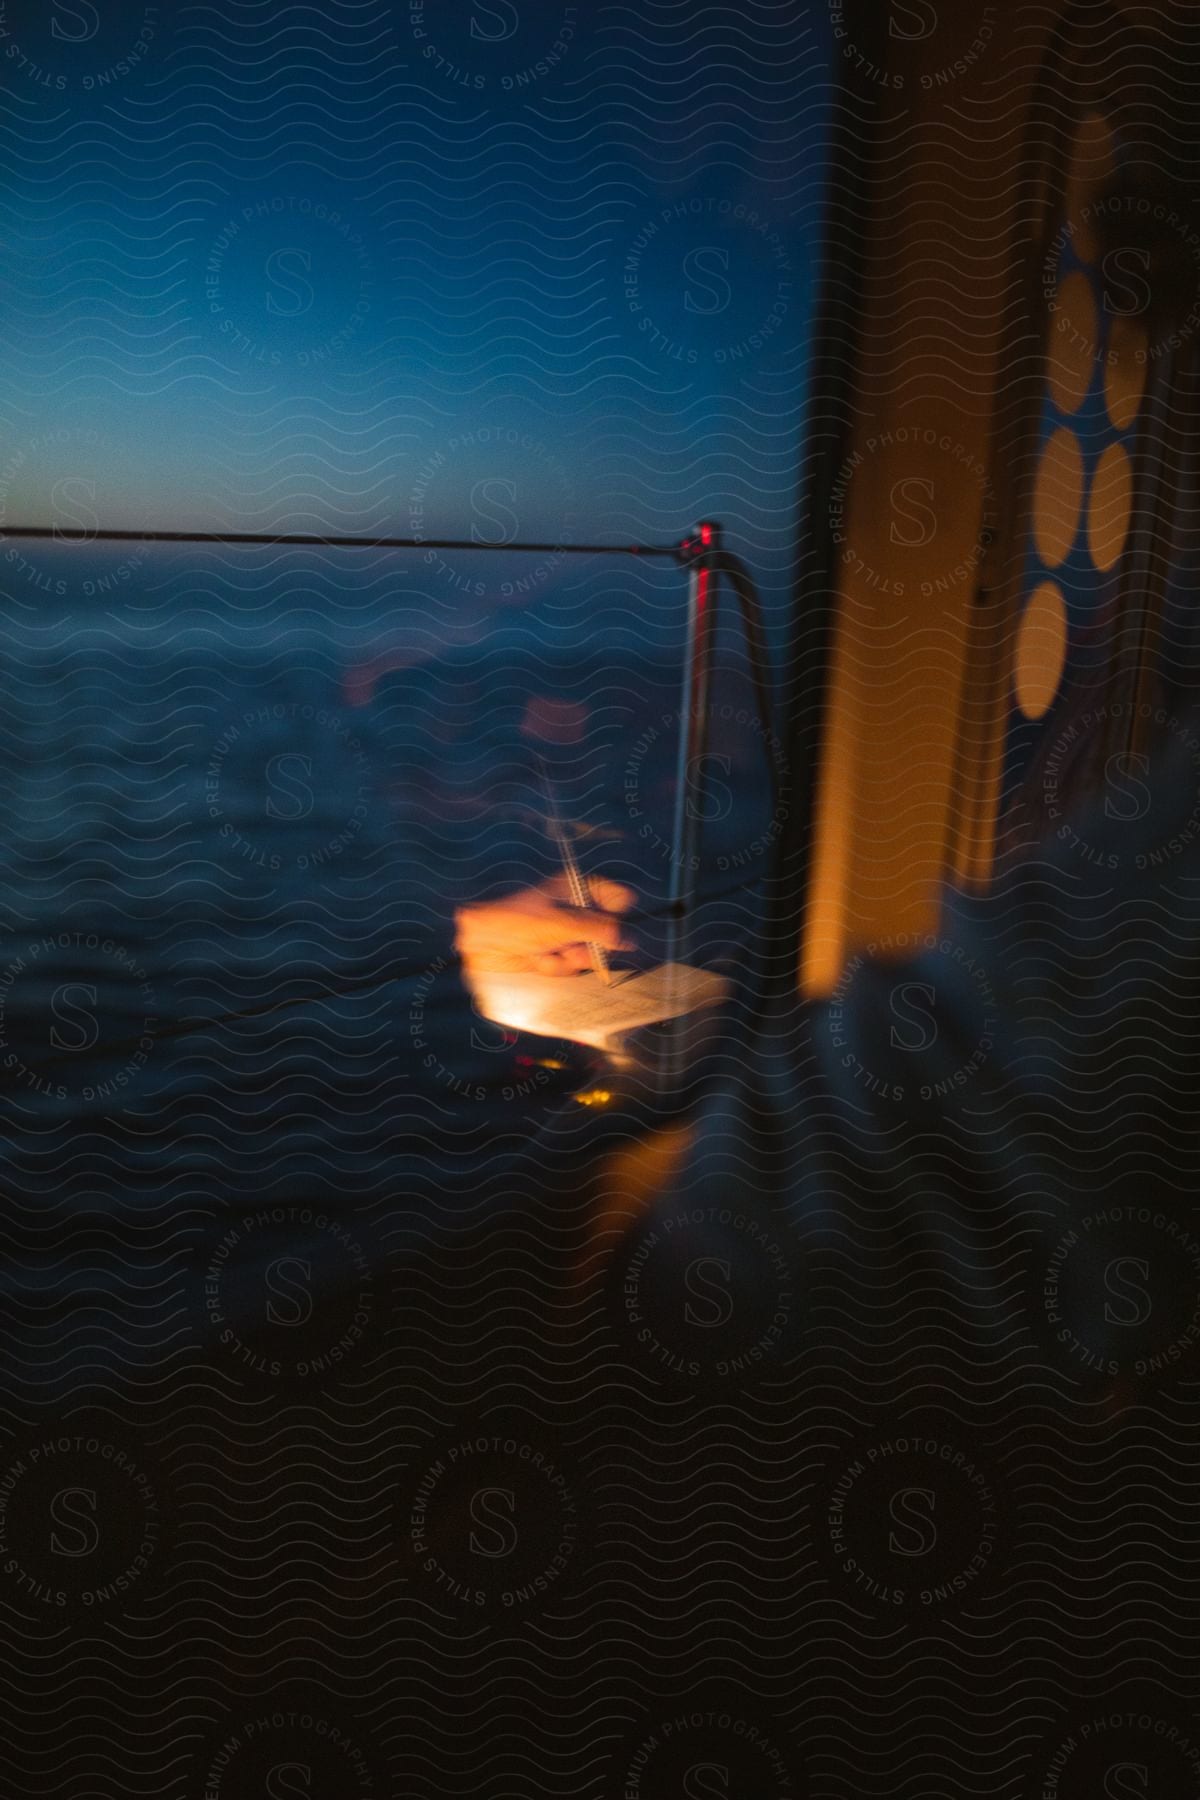 A person writes by candlelight on a boat at dusk